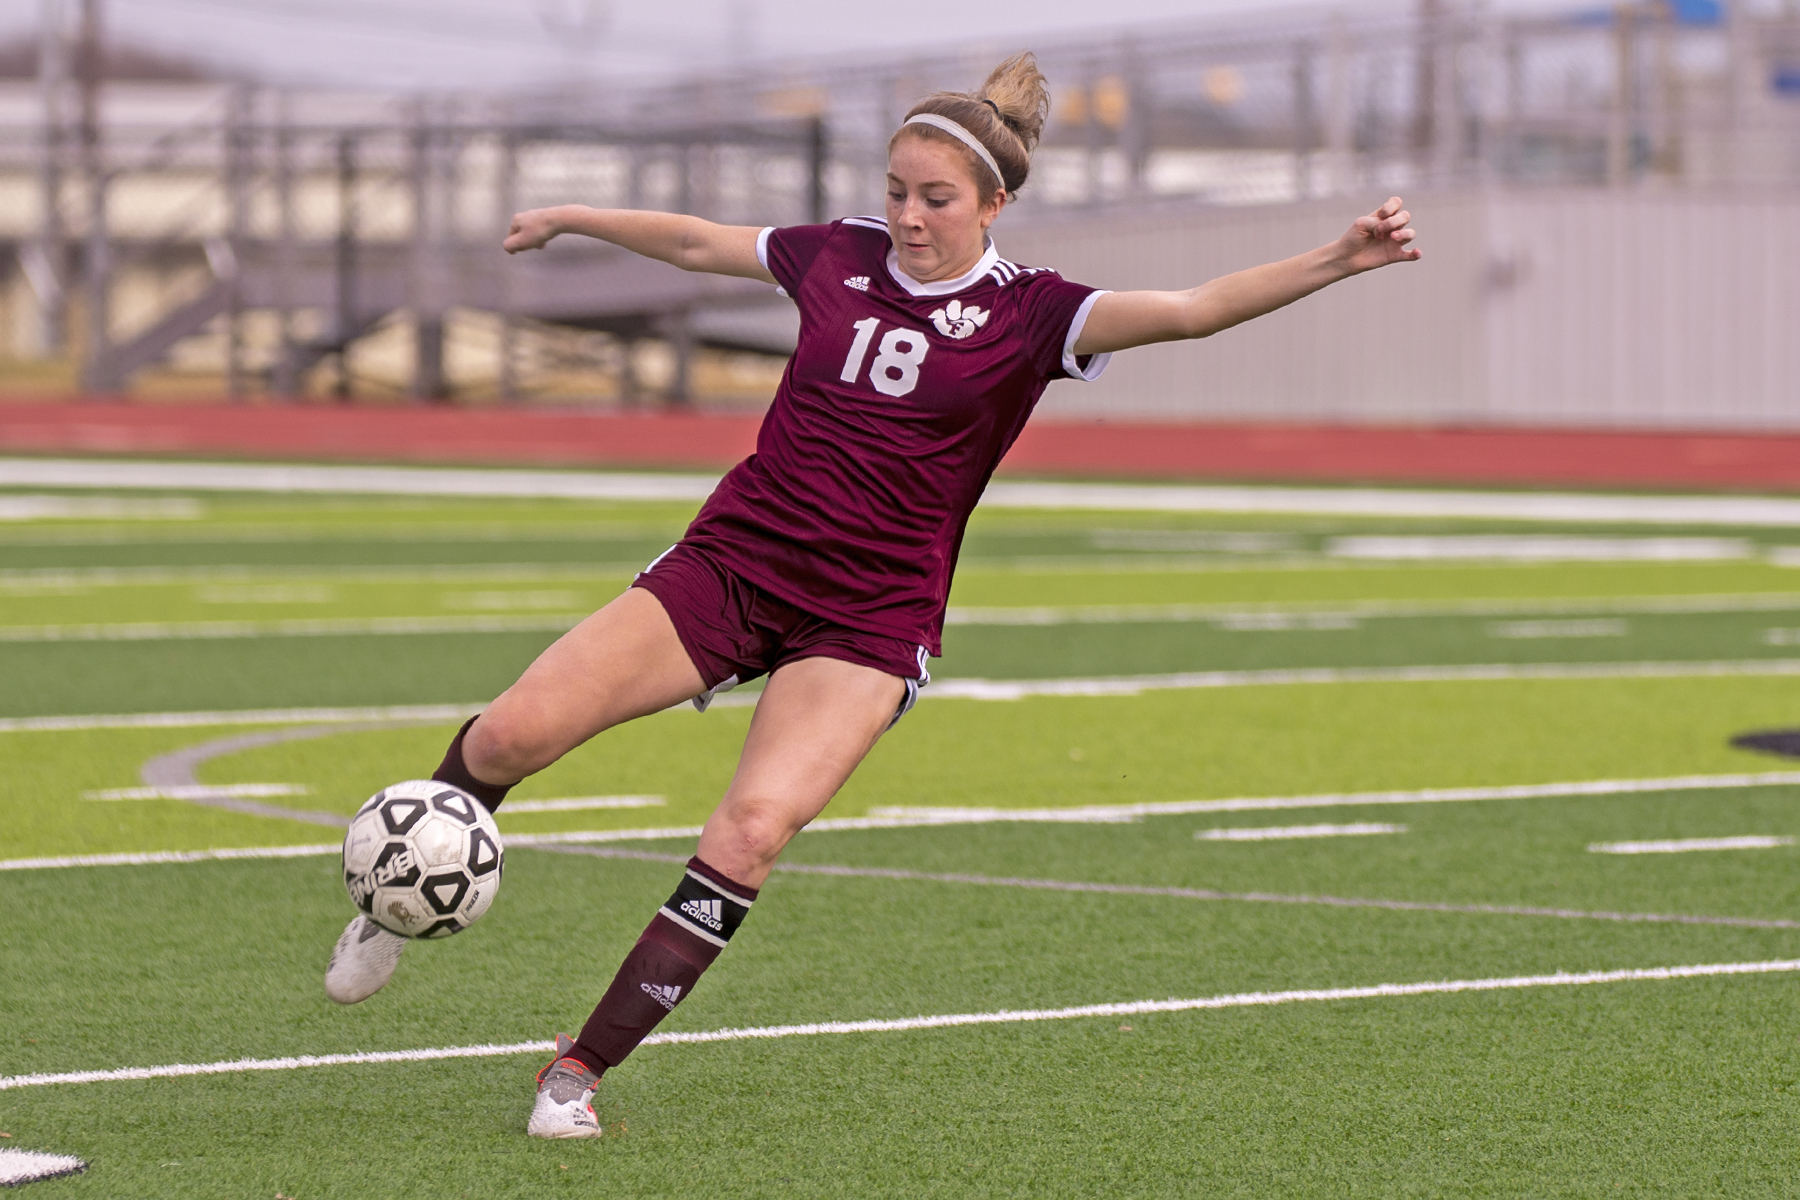 Cy-Fair High School senior Marisa Dale and the Bobcats finished second in District 17-6A and will face Houston Heights at 5:30 p.m. on March 25 at the Berry Center.